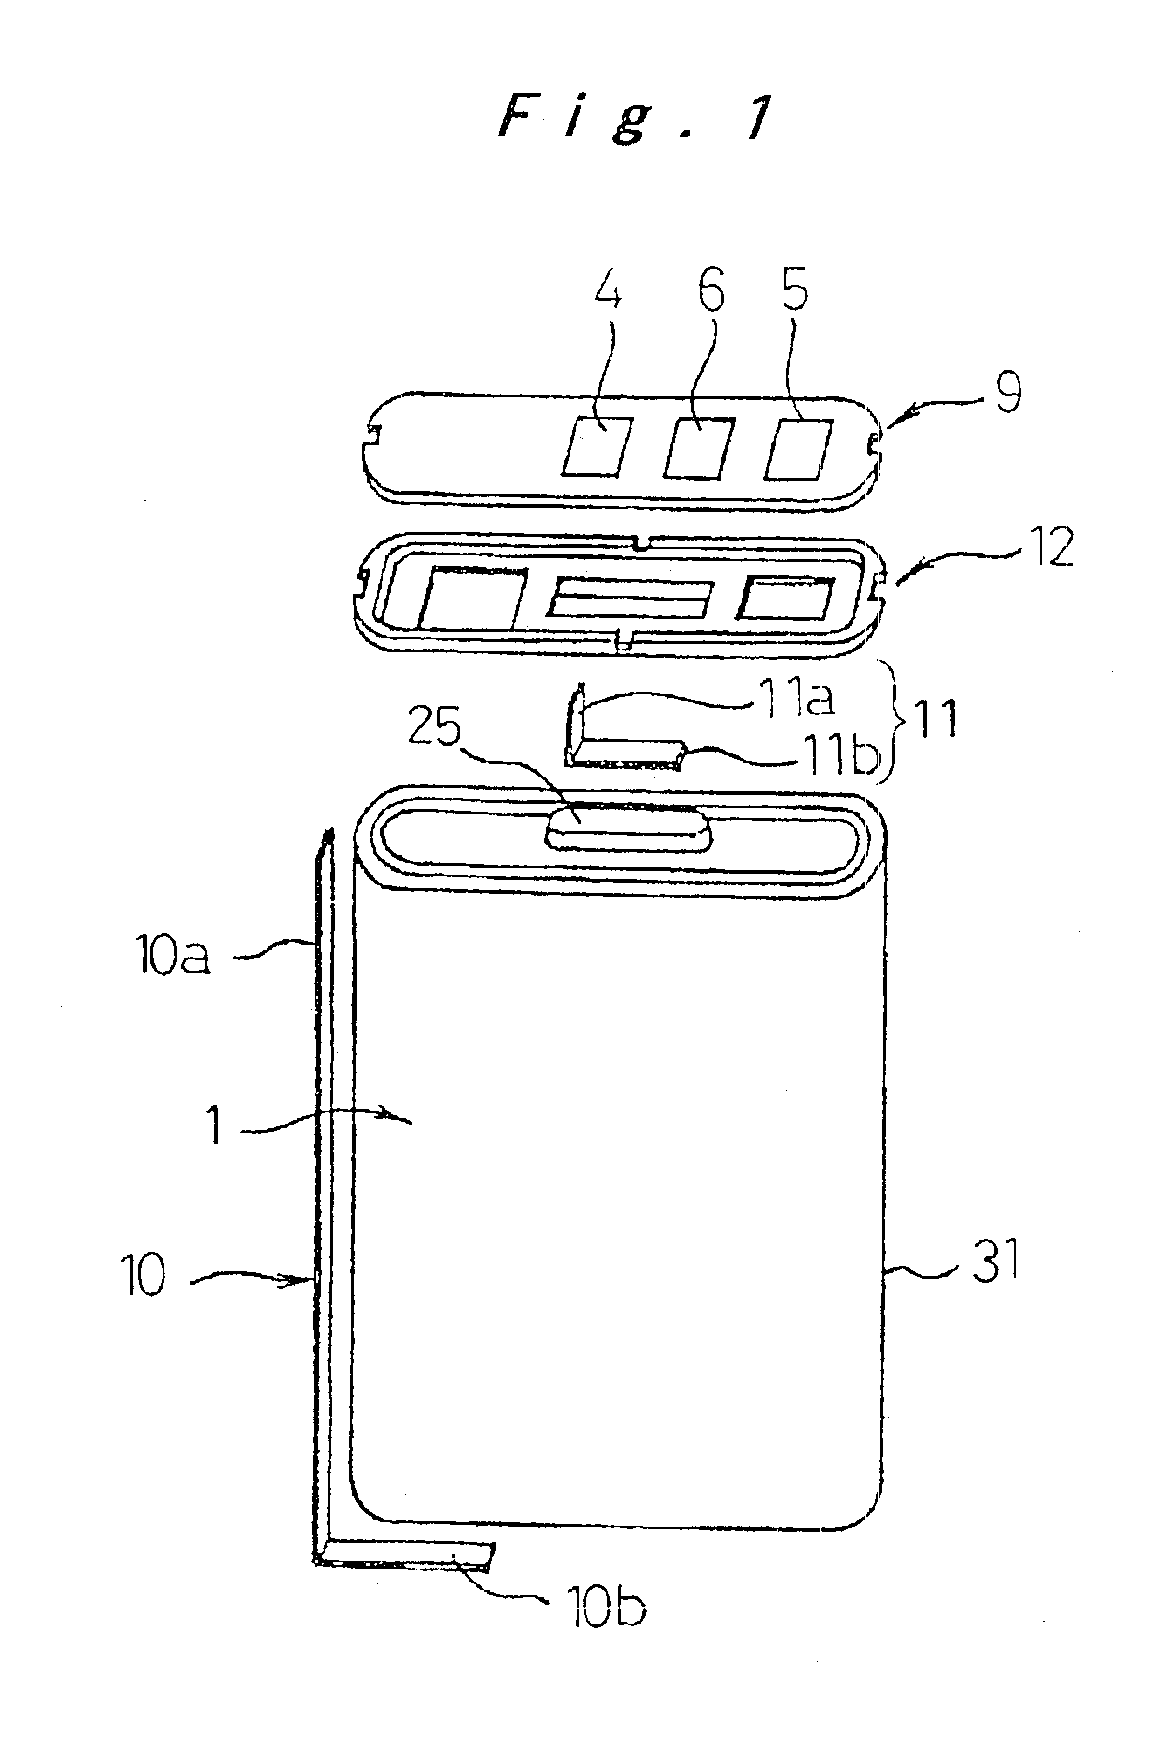 Method for forming outer packaging body of product